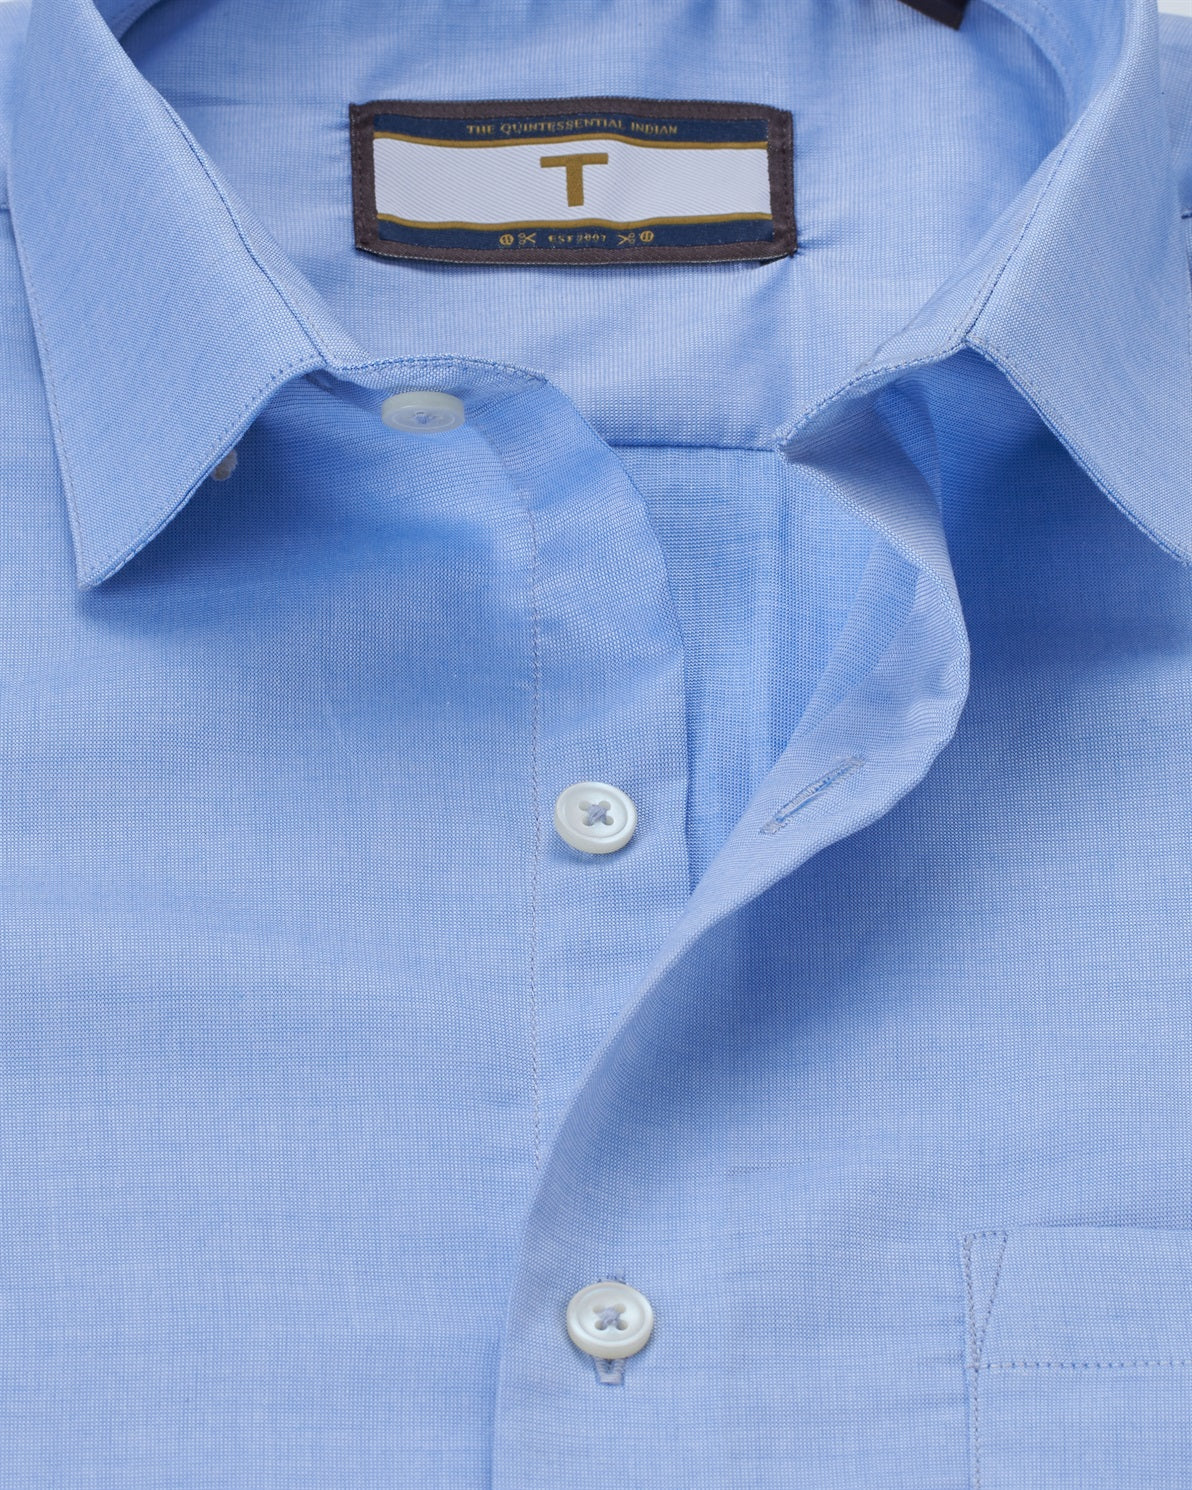 T the brand Solid Cotton Slim fit Shirt with Full-Sleeves - Light Blue